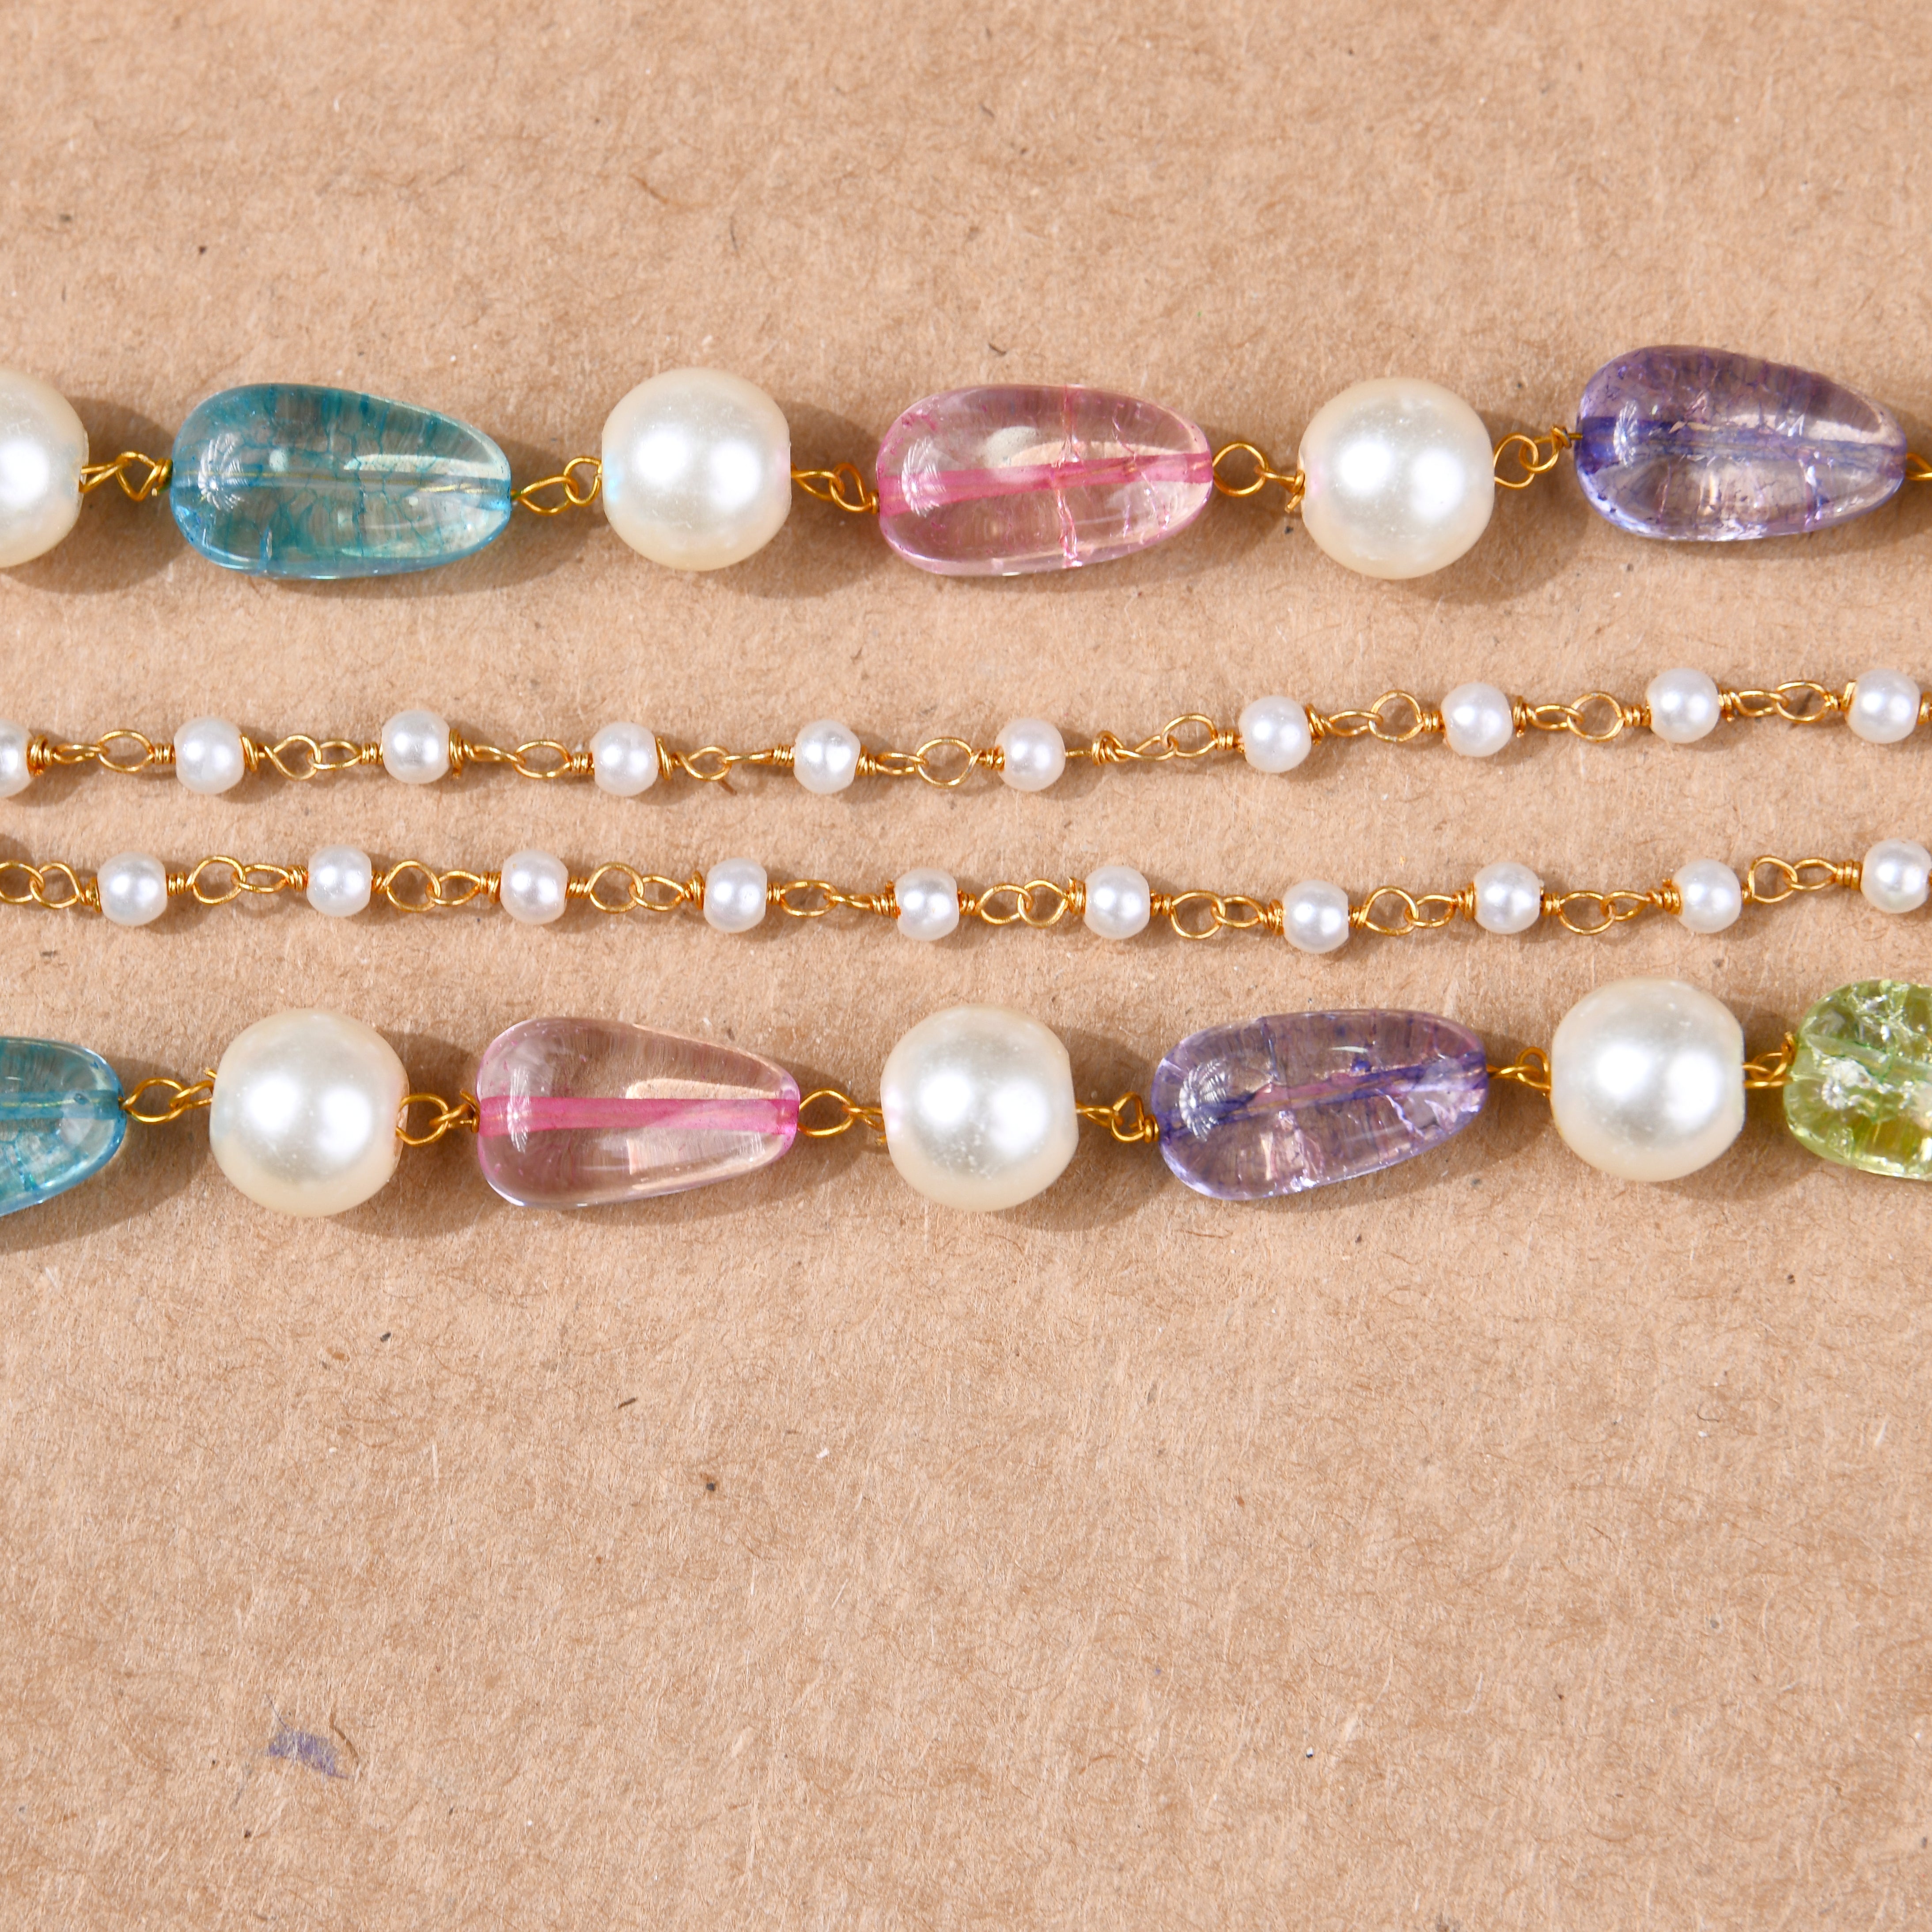 Multicolour Crystals and Pearls Double Layered Necklace